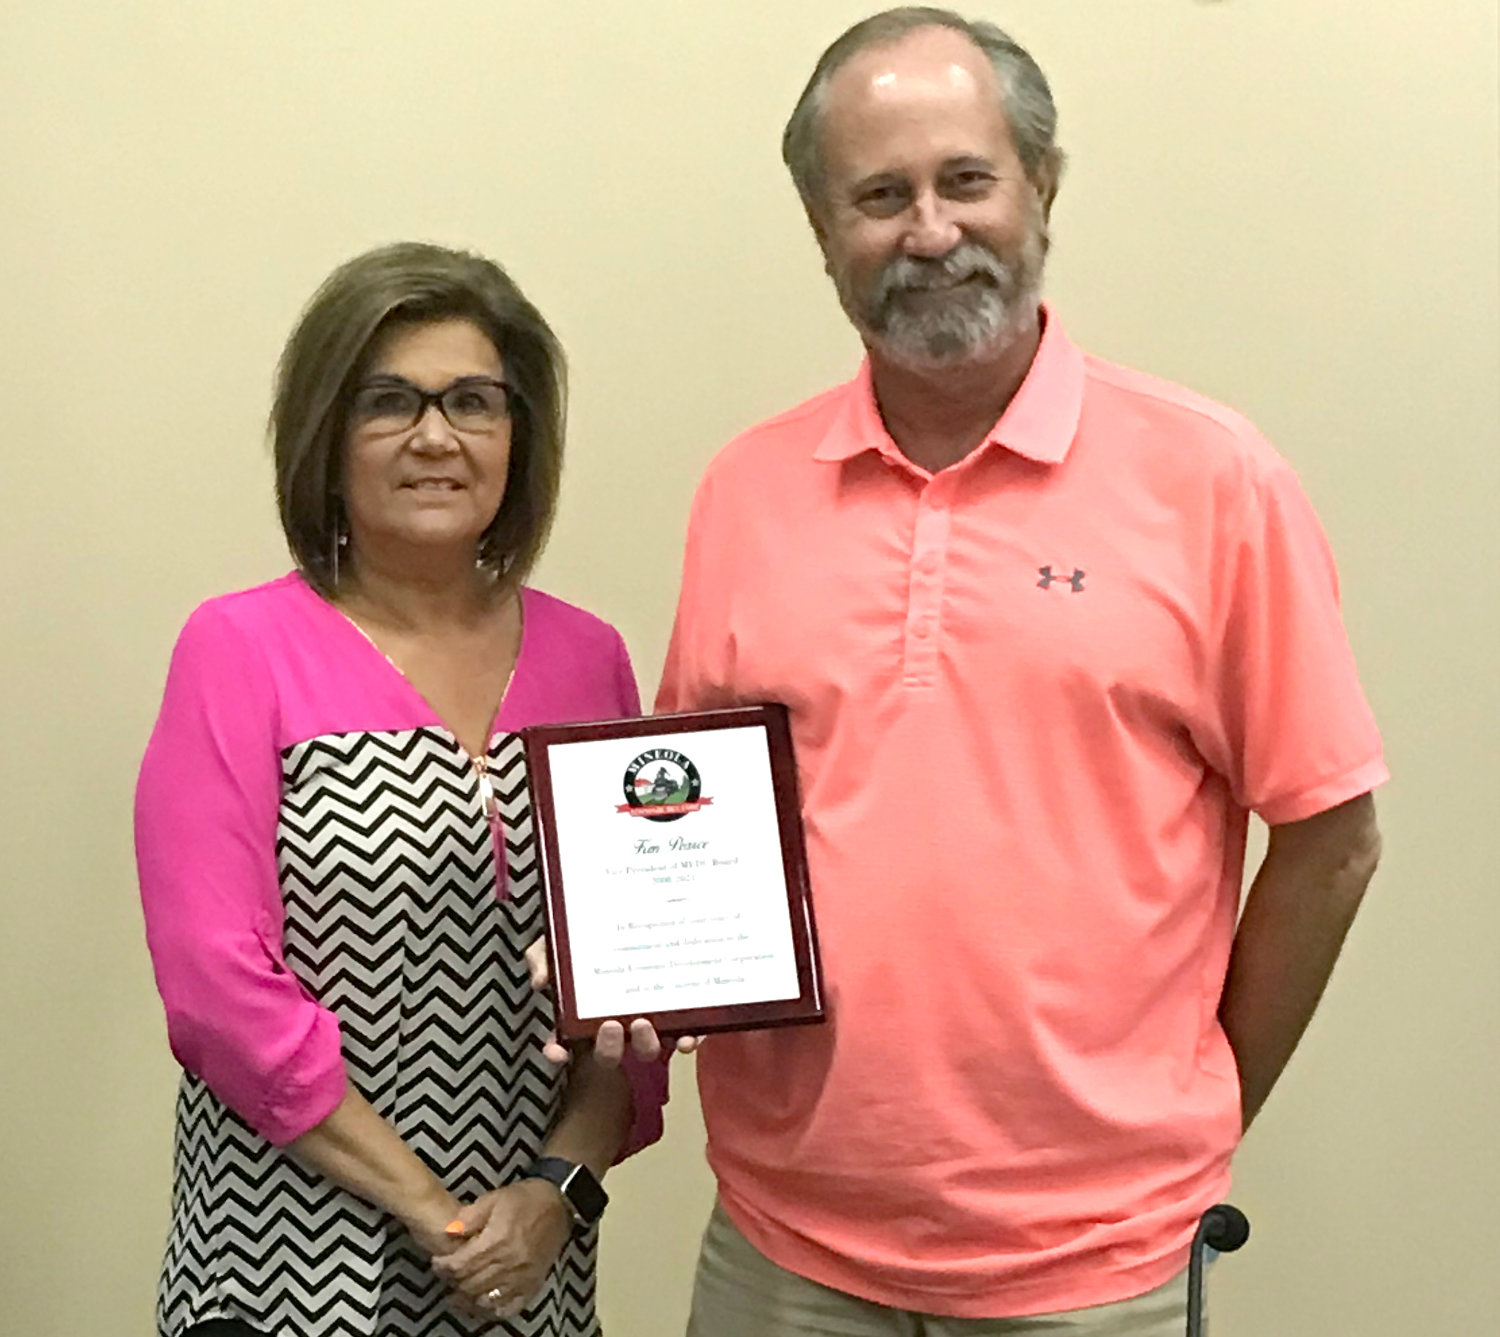 Mineola City Manager Mercy Rushing congratulates Ken Pearce for his service to the Mineola Economic Development Corp. board of directors.